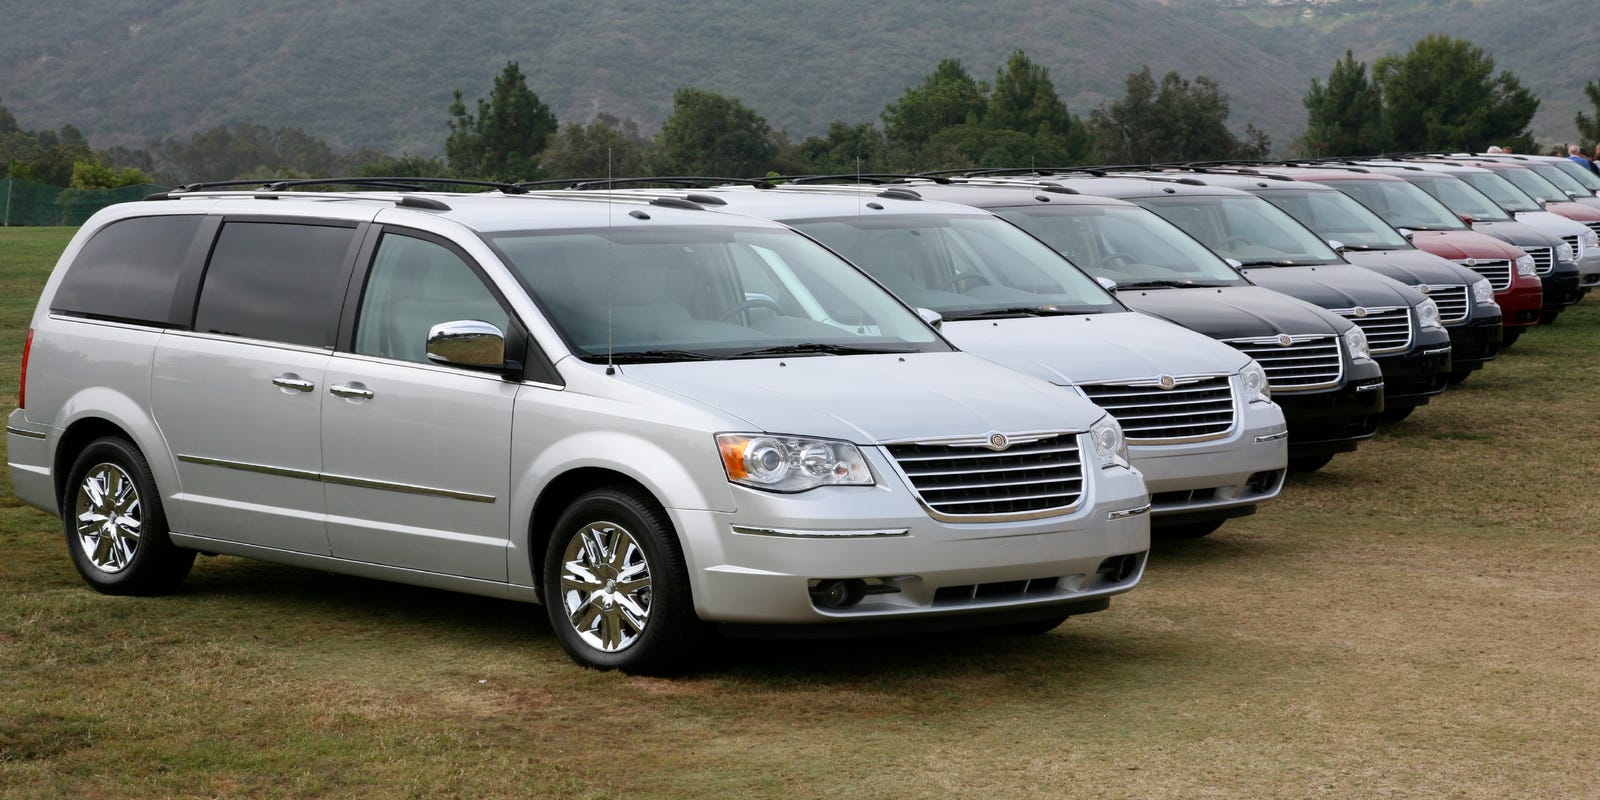 Chrysler aims to shed minivan with new design